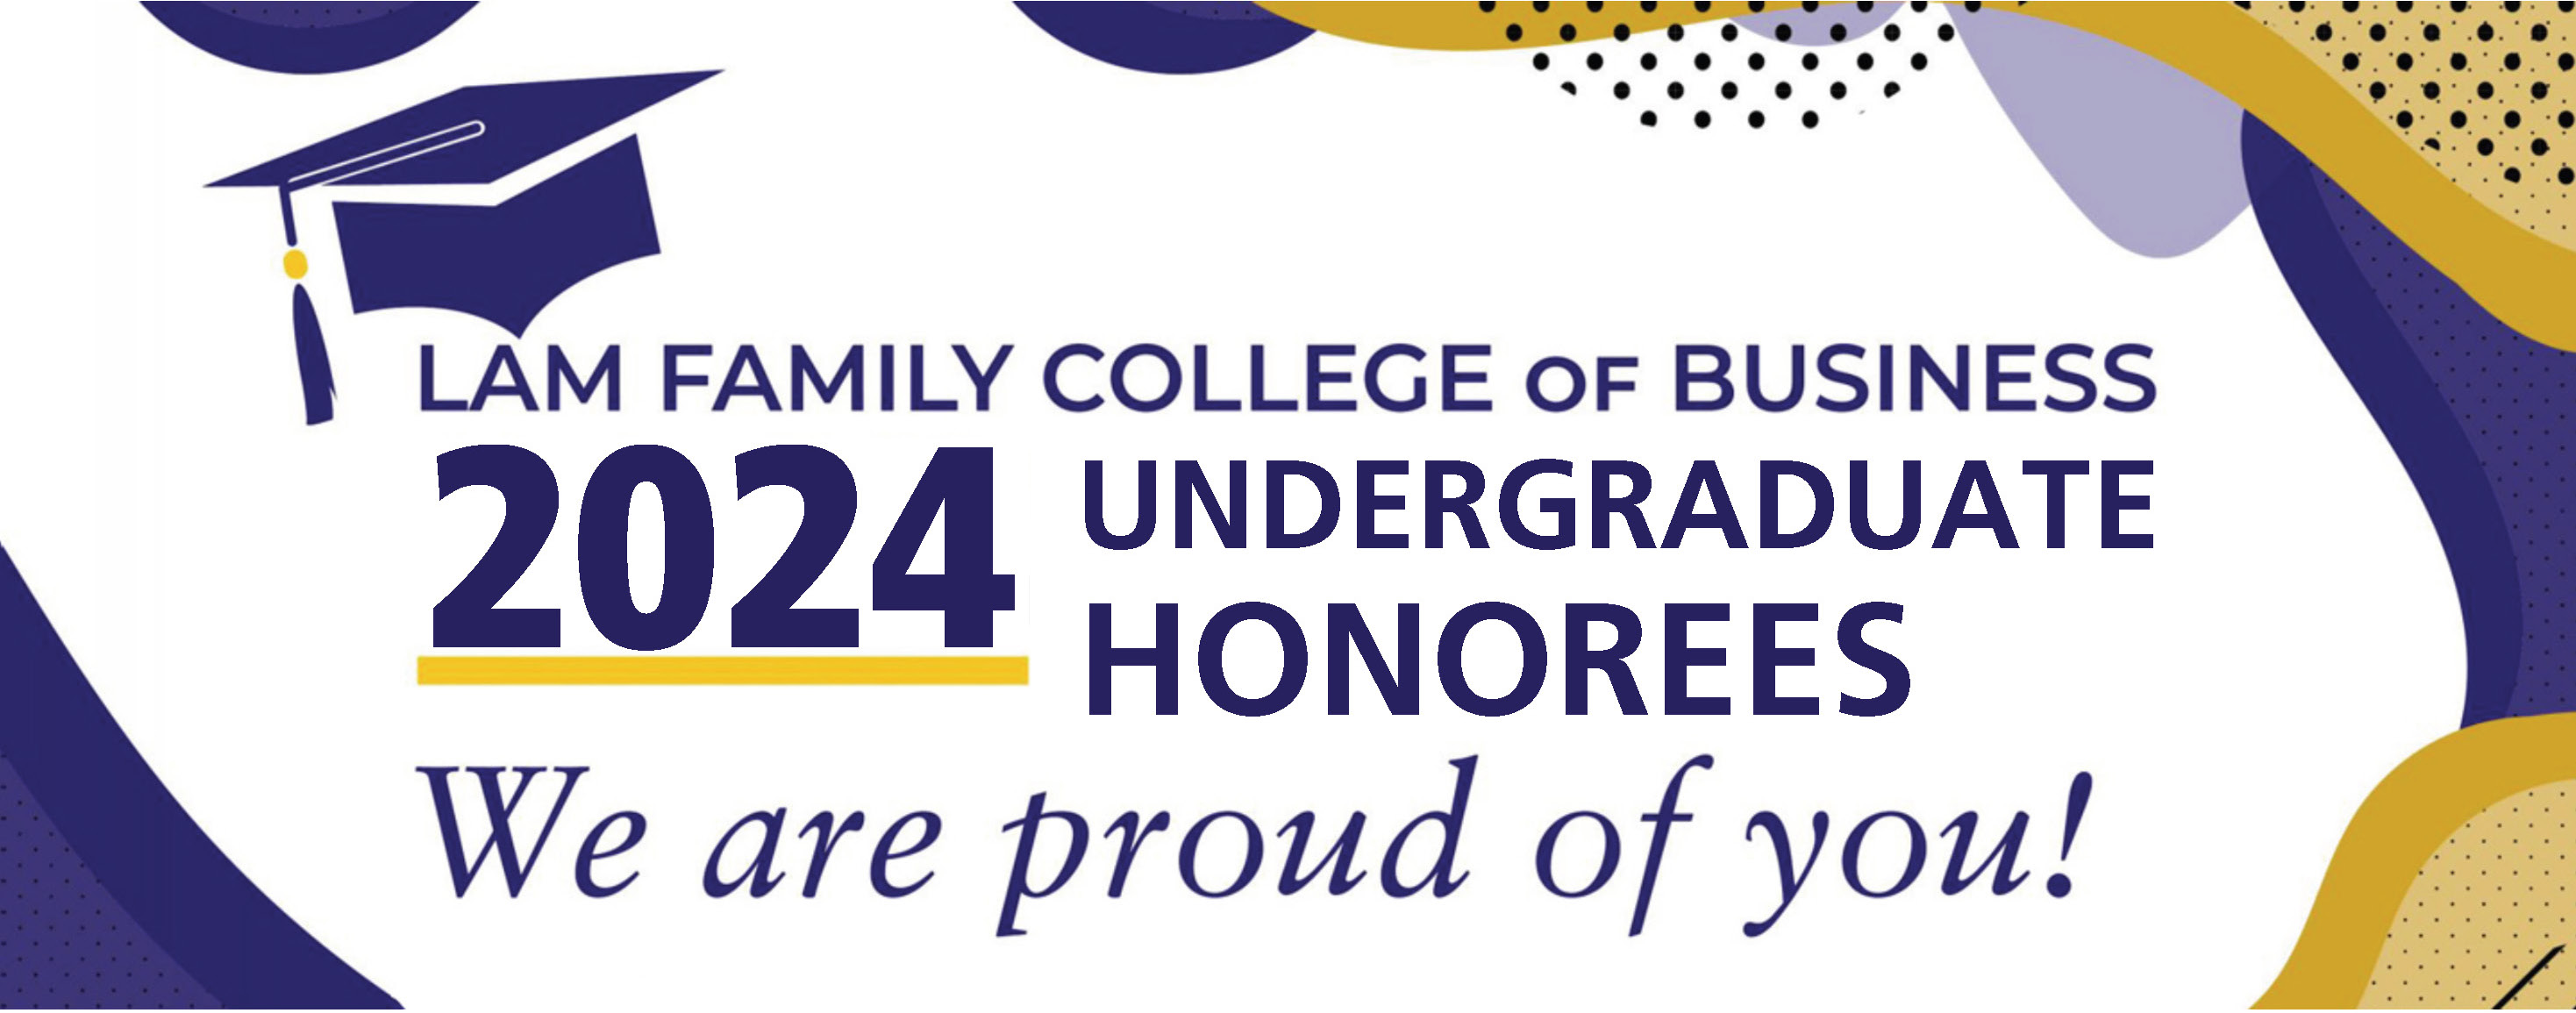 Lam Family College of Business 2024 Undergraduate Honorees. We are proud of you!